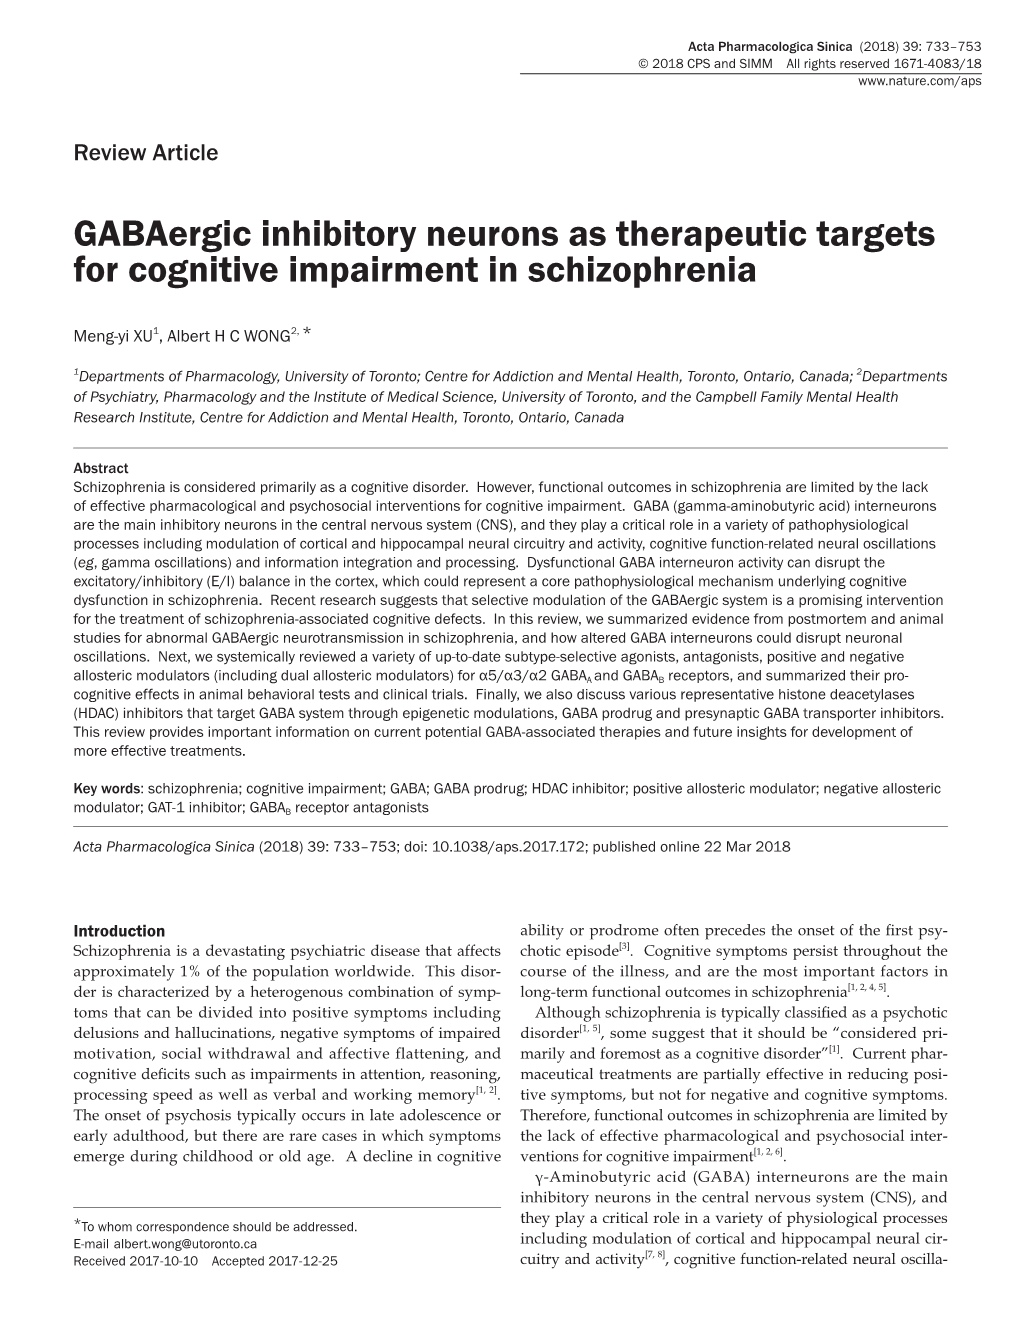 Gabaergic Inhibitory Neurons As Therapeutic Targets for Cognitive Impairment in Schizophrenia